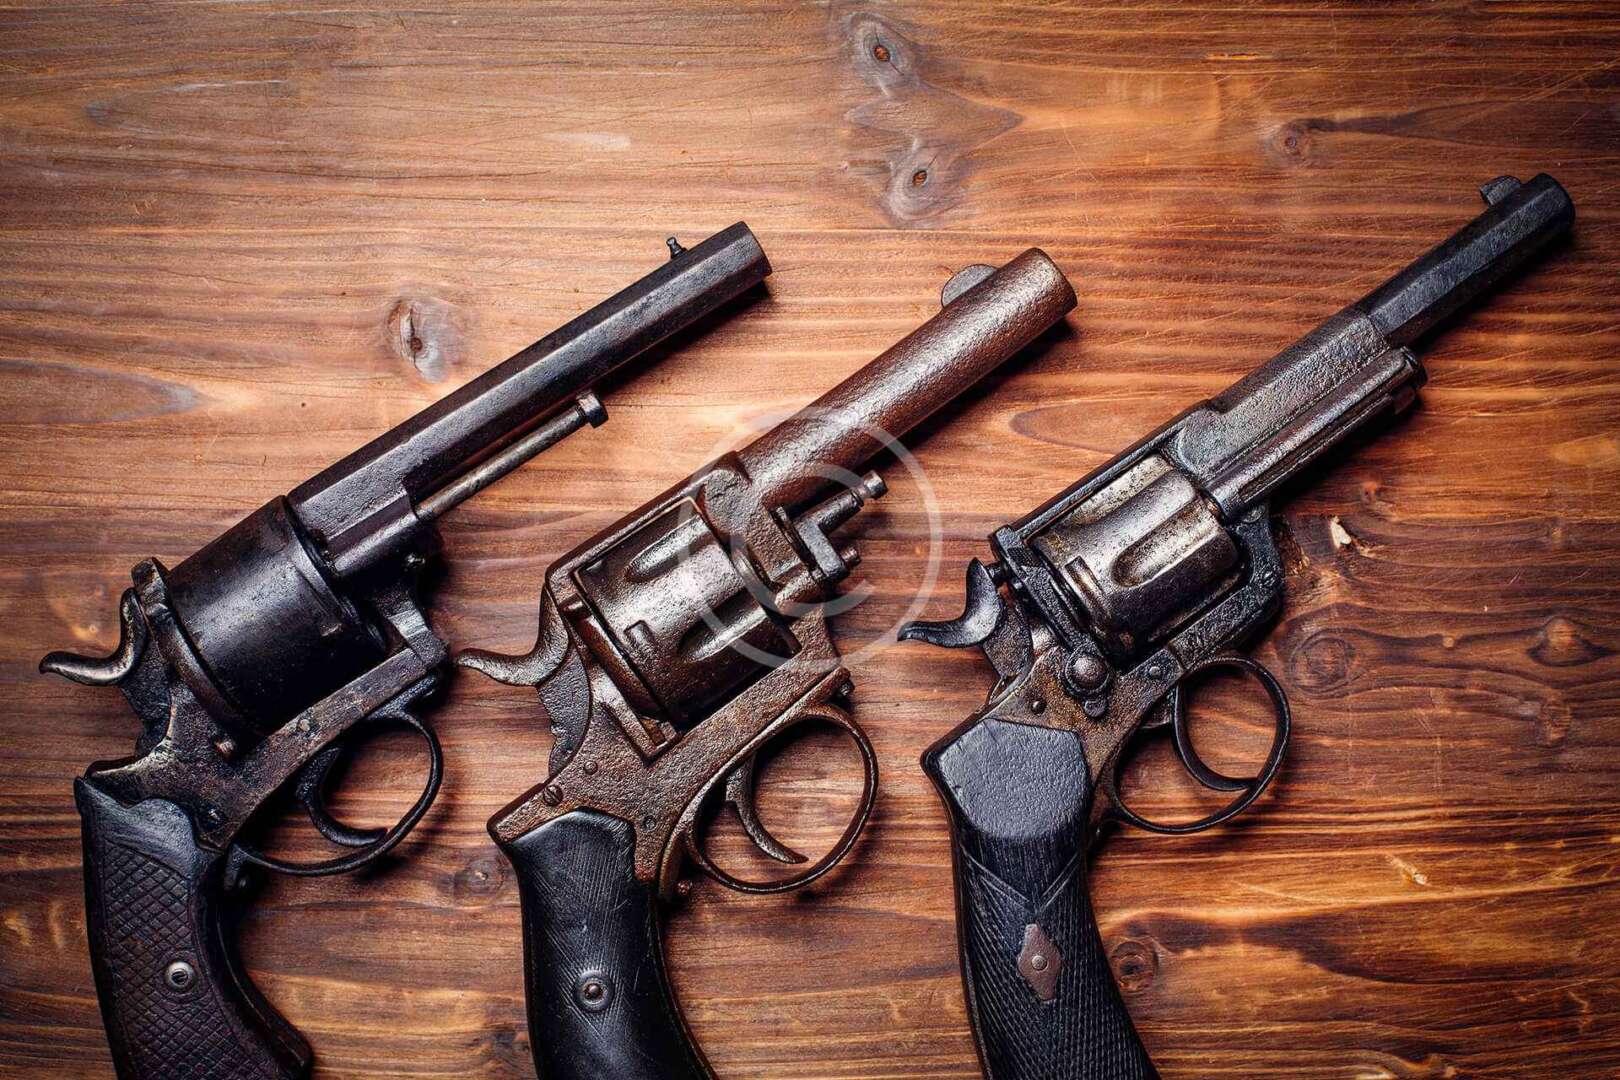 Three revolvers on a wooden table.